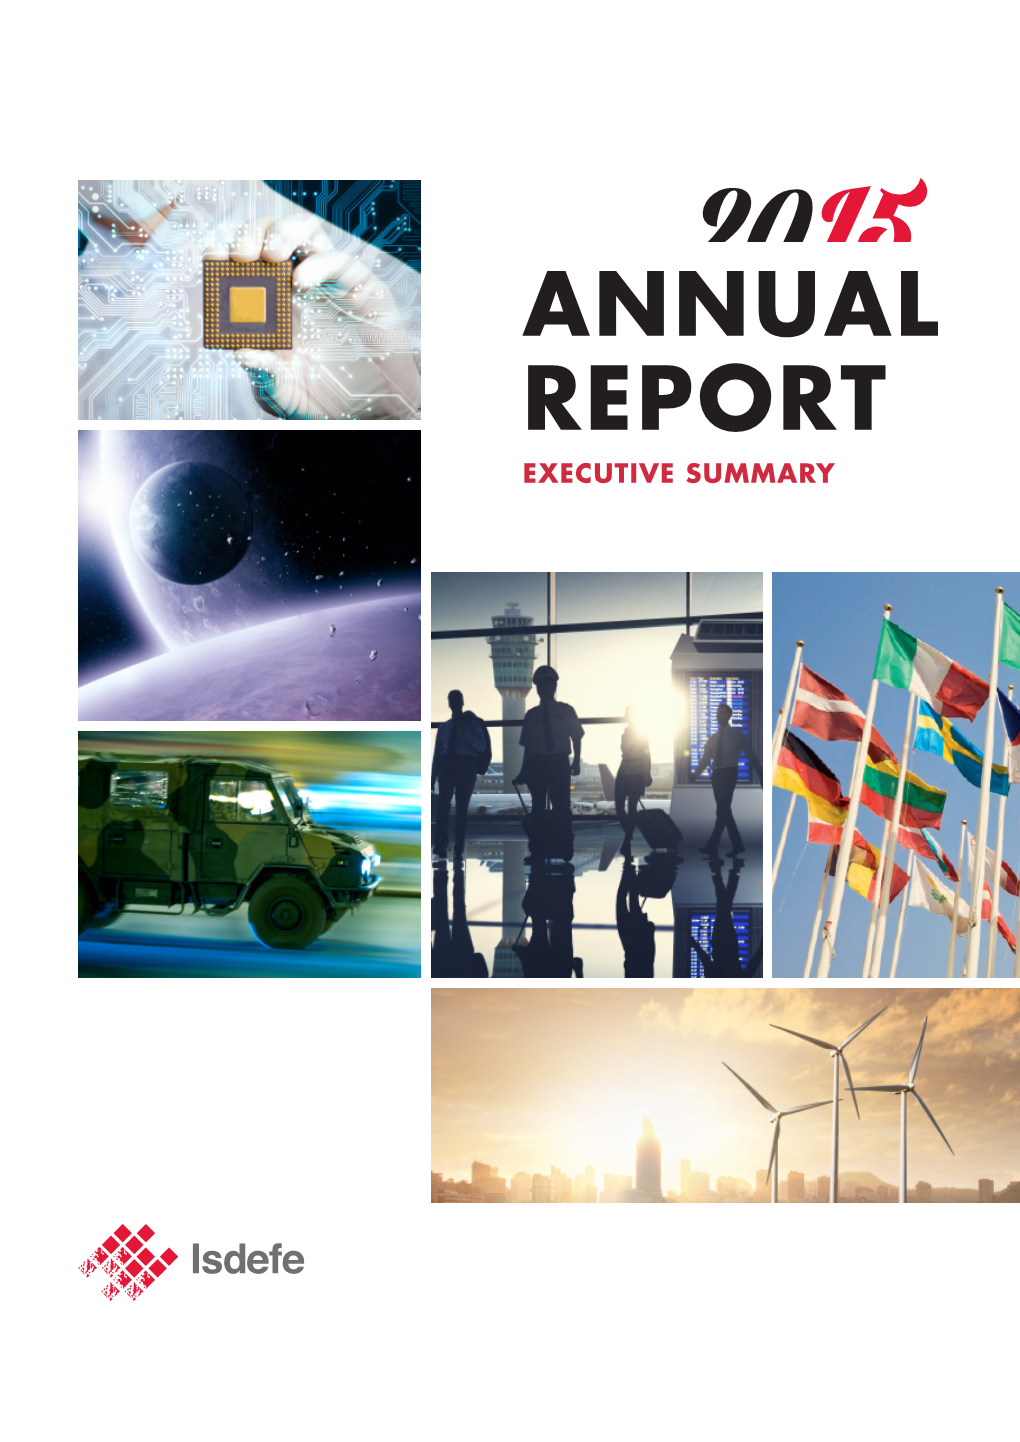 ANNUAL REPORT EXECUTIVE SUMMARY 2015 Isdefe Annual Report